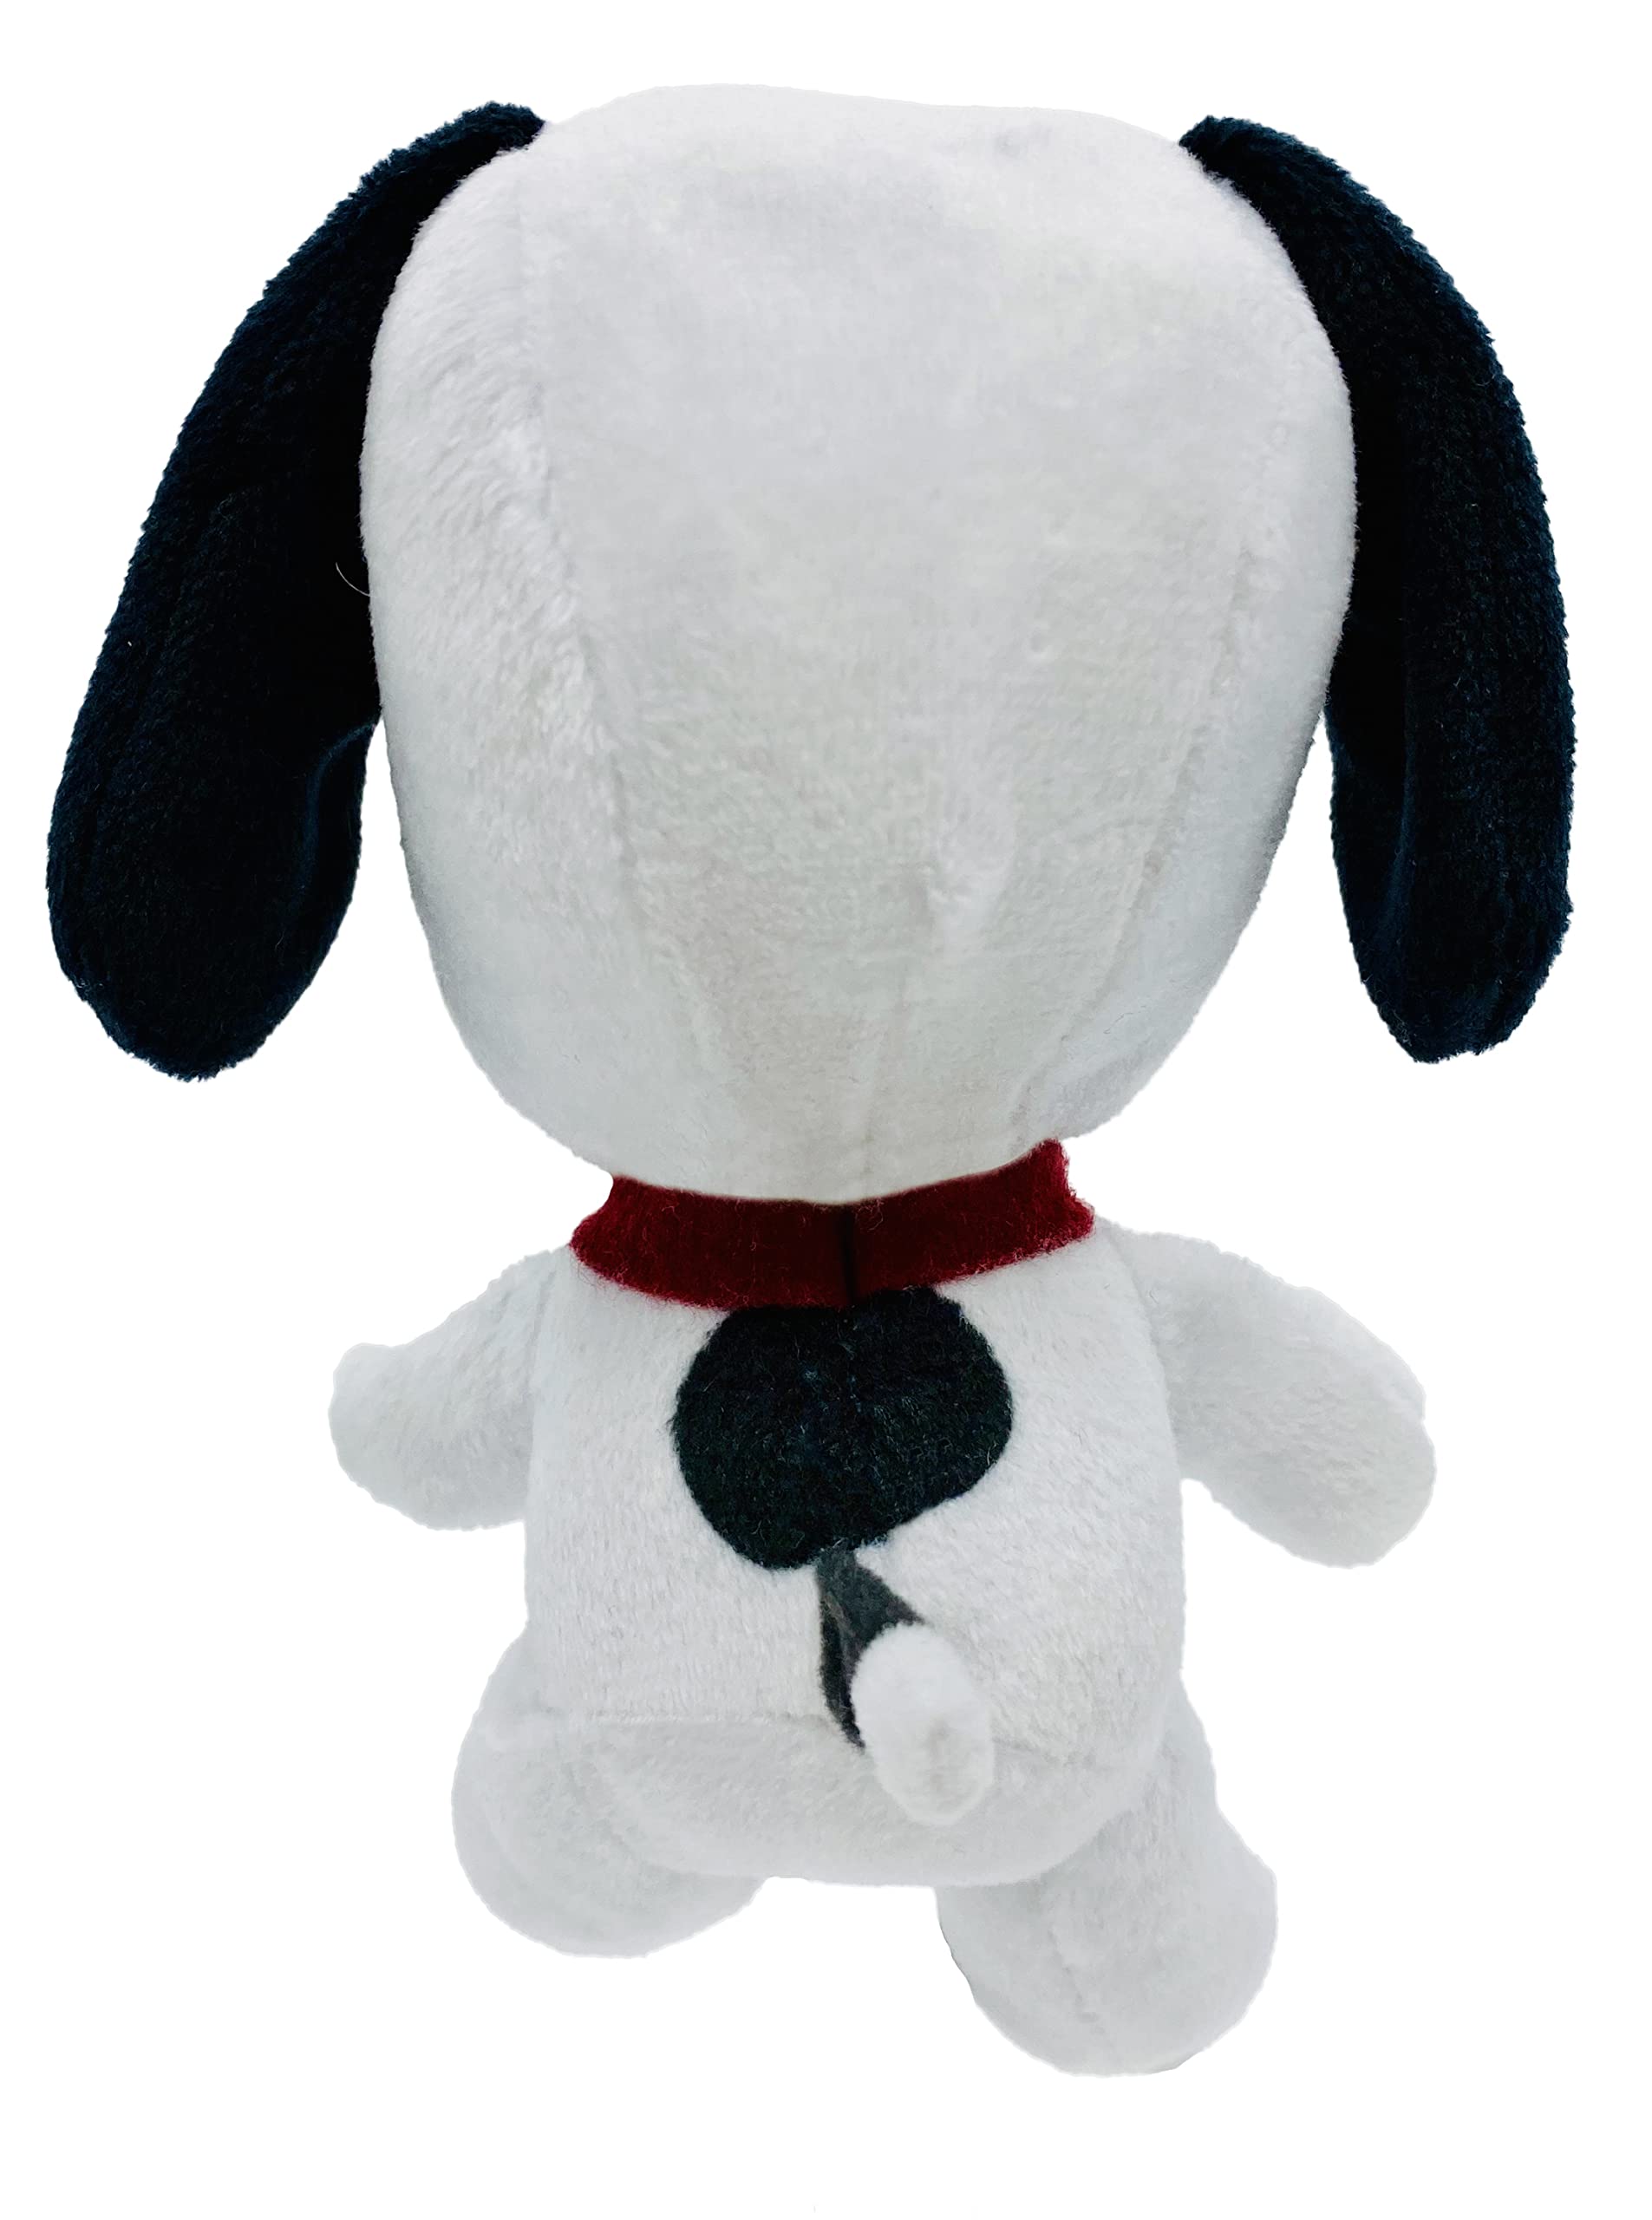 JINX Official Peanuts Collectible Plush Snoopy, Excellent Plushie Toy for Toddlers & Preschool, Super Cute